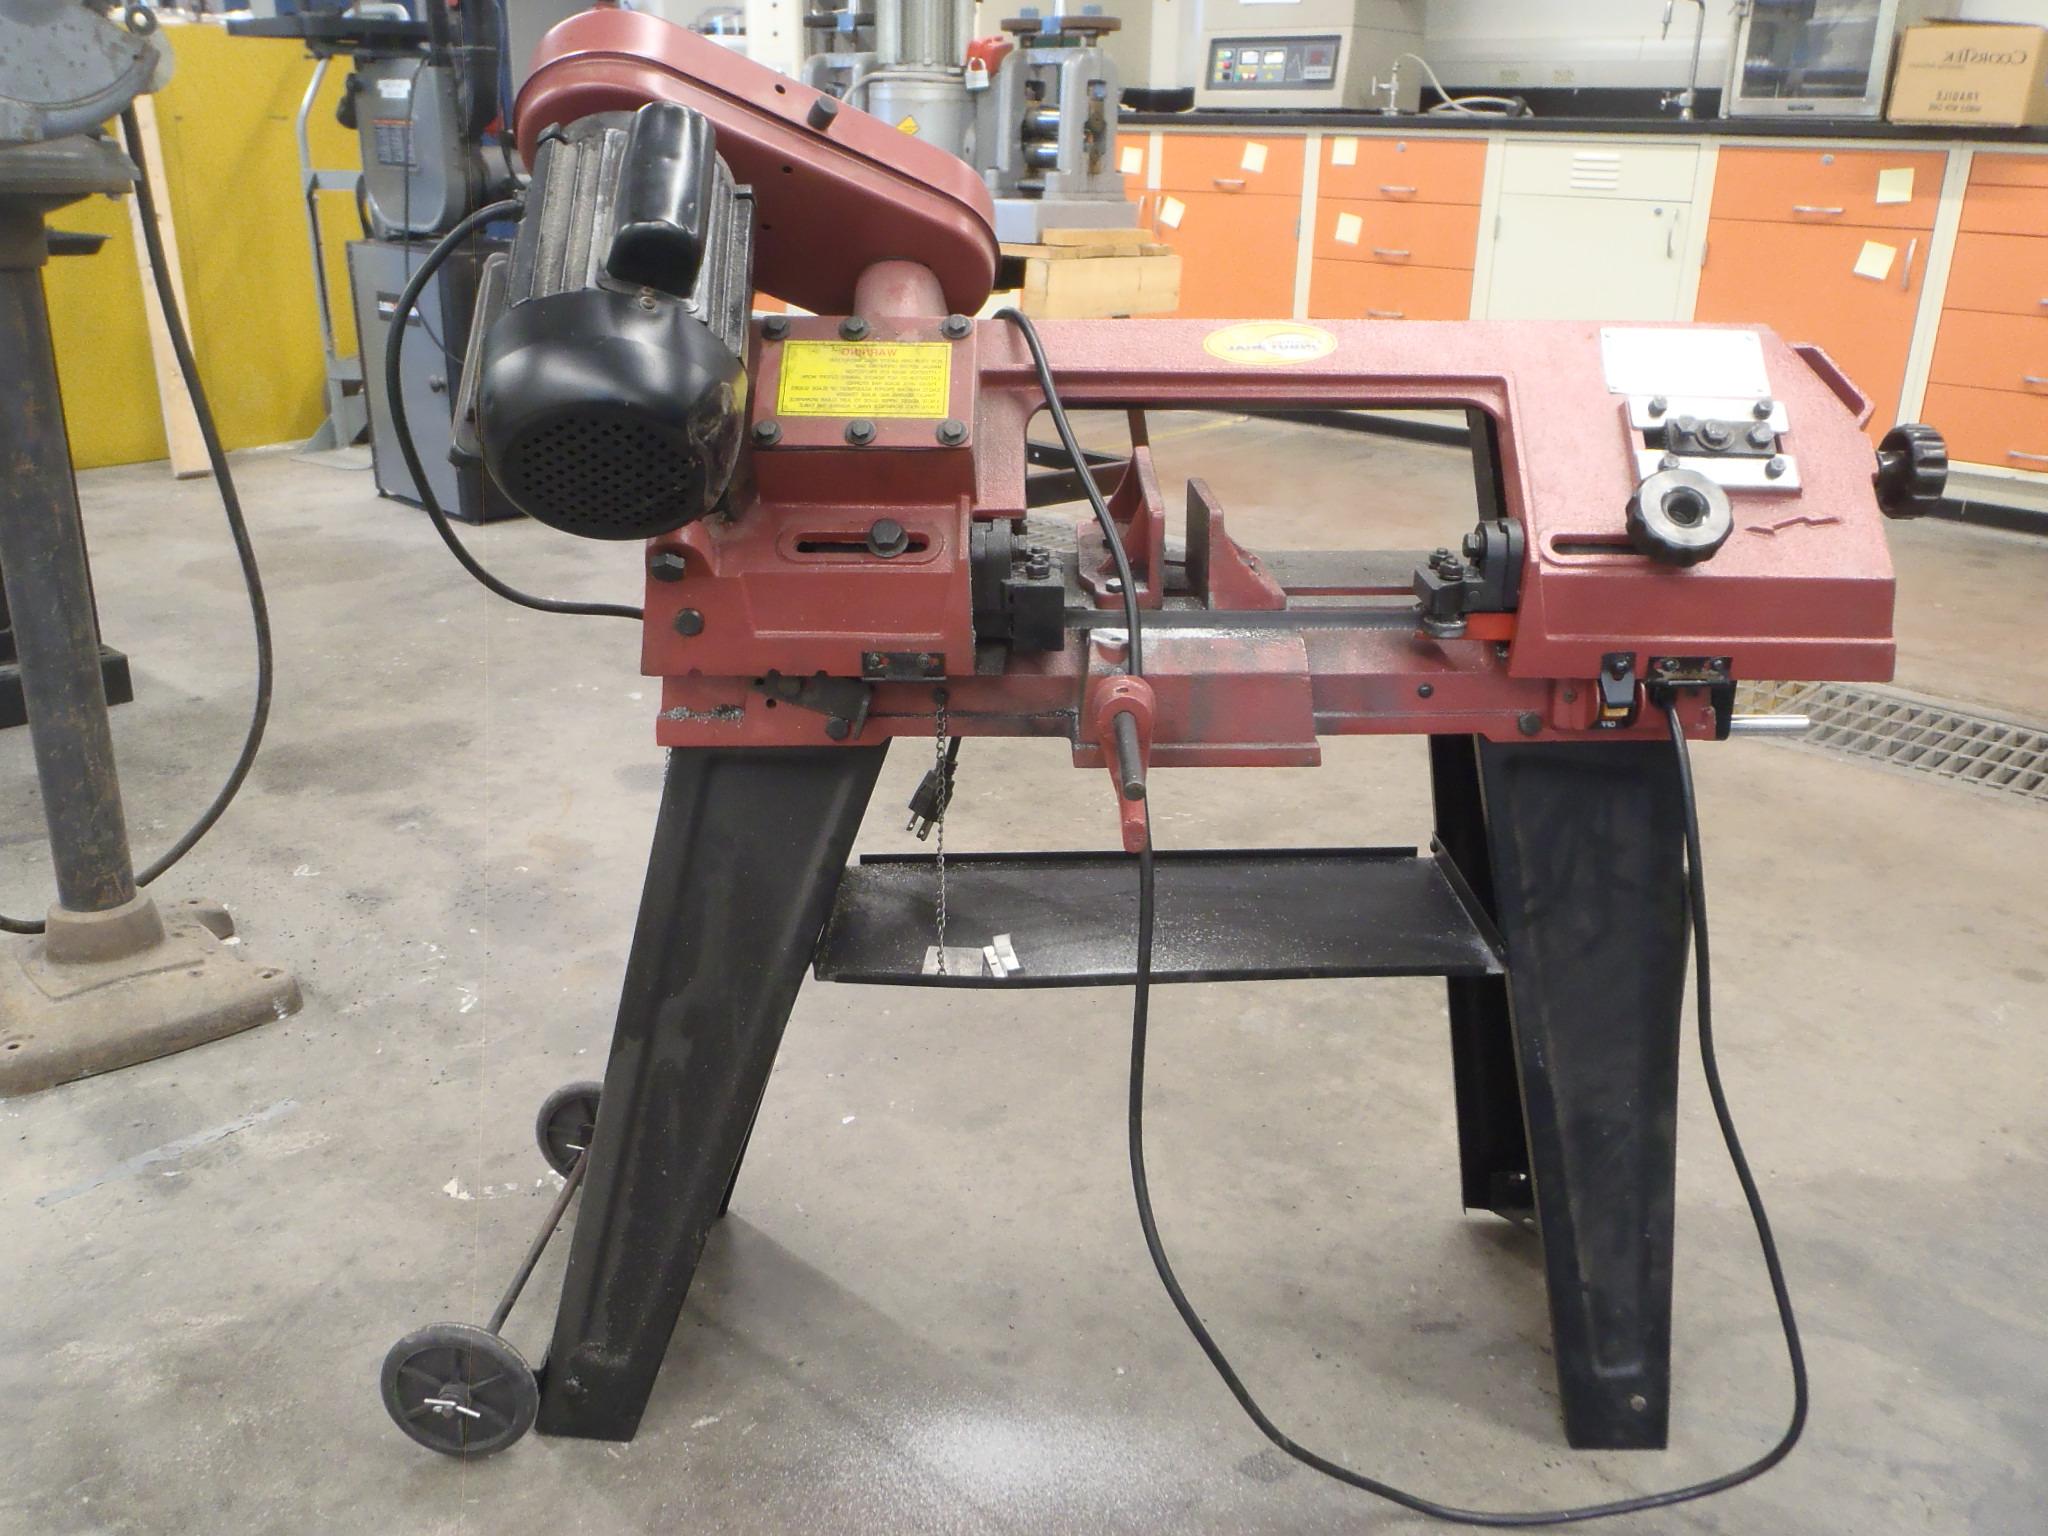 Northern Industrial Horizontal Vertical Cut Band Saw